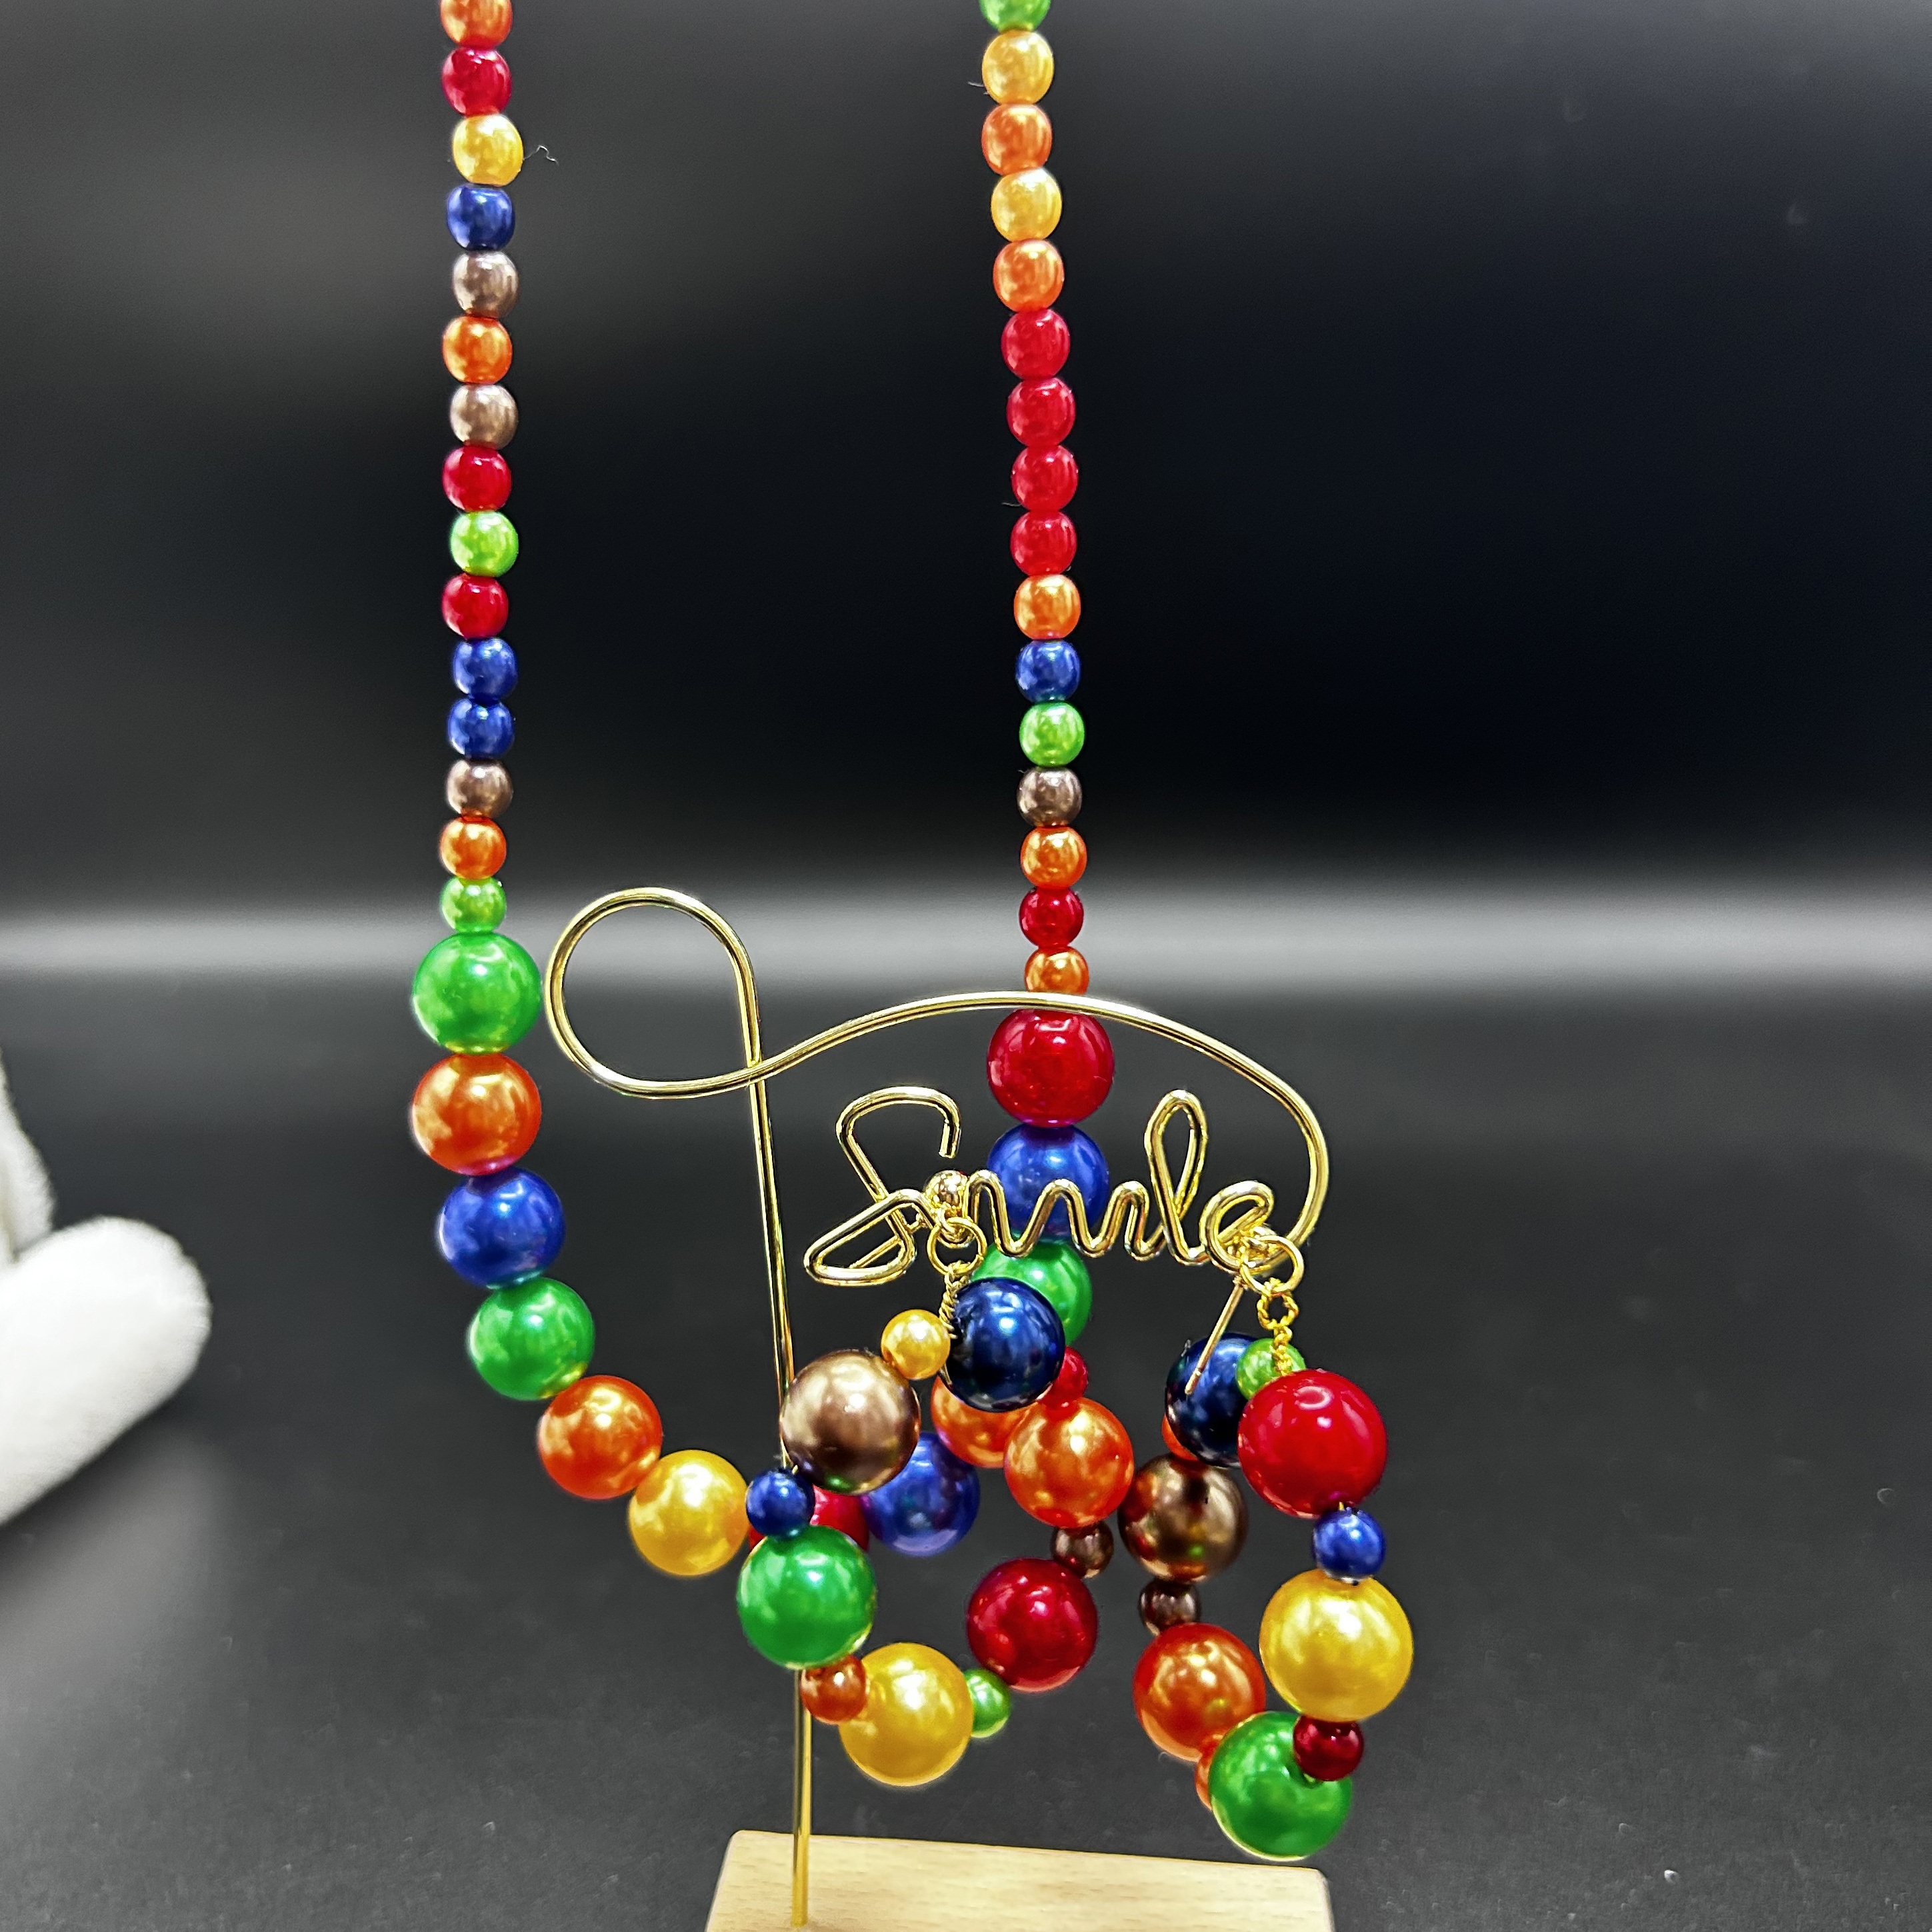 Temu 1 Pair of Earrings + 1 Necklace Coquette Style Jewelry, Jewels Set Made of Colorful Beads Match Daily Outfits Party Accessories, Color Is Uncertain